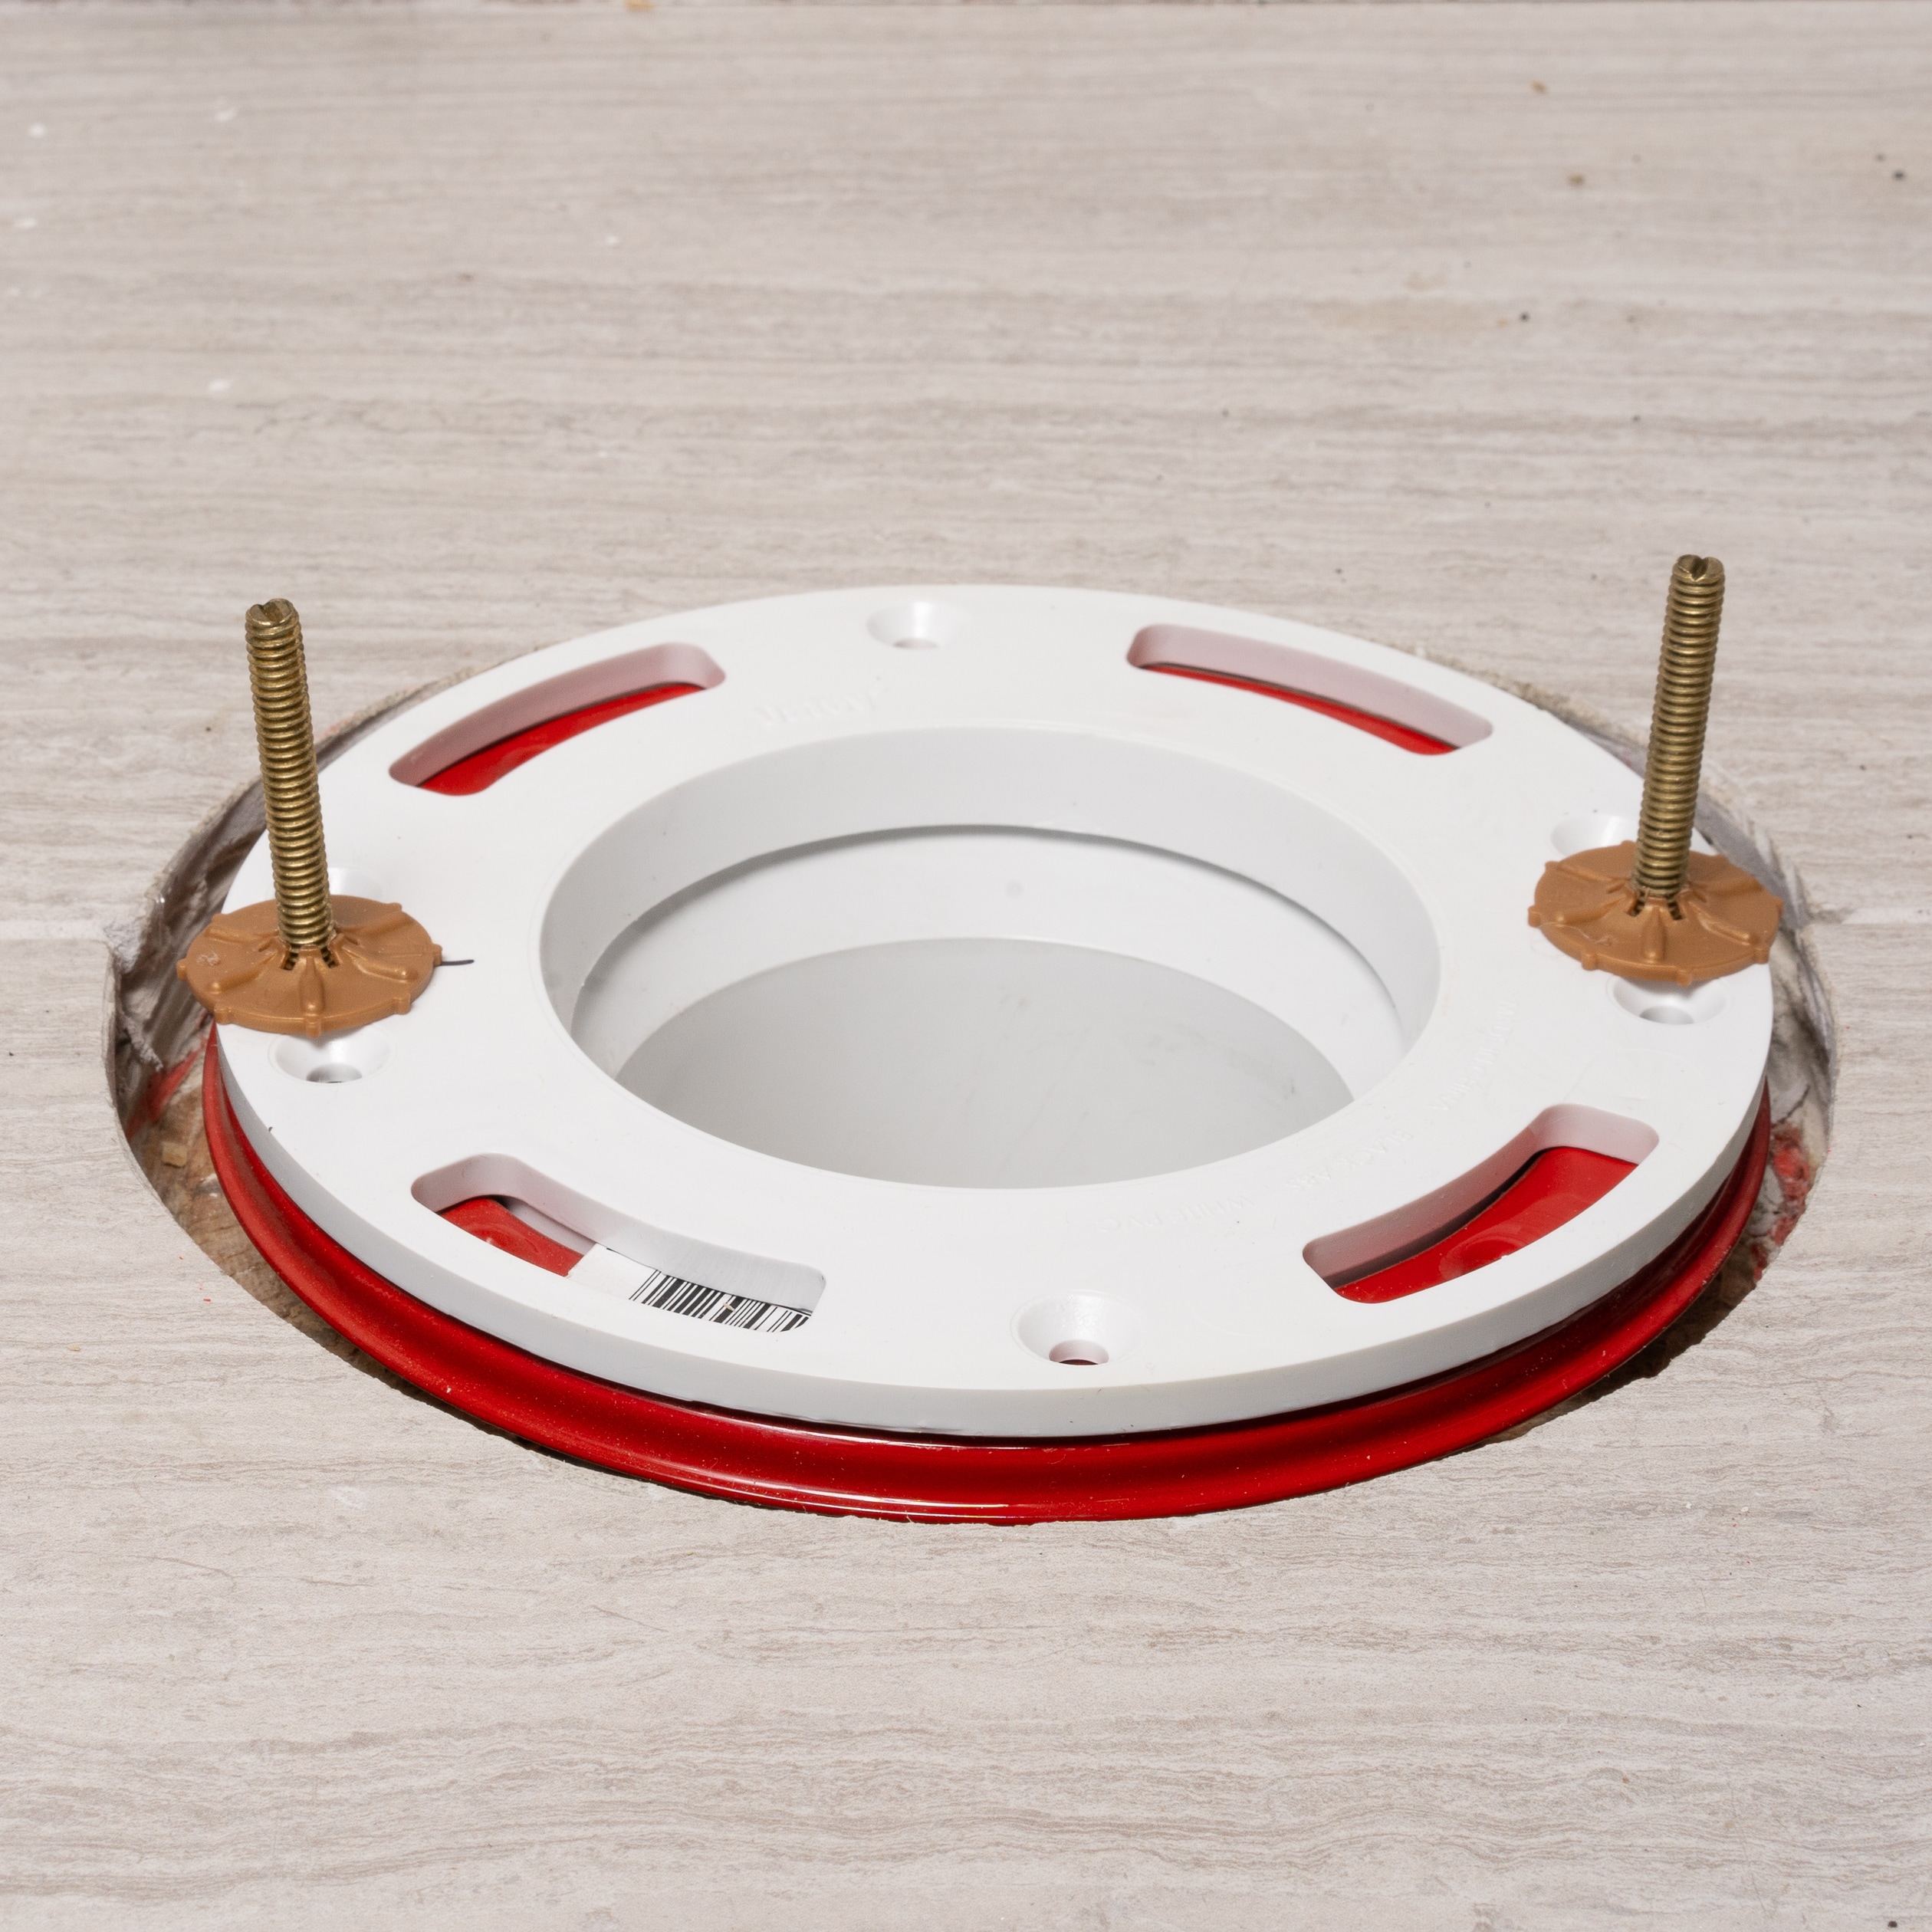 How To Install a New Toilet Flange